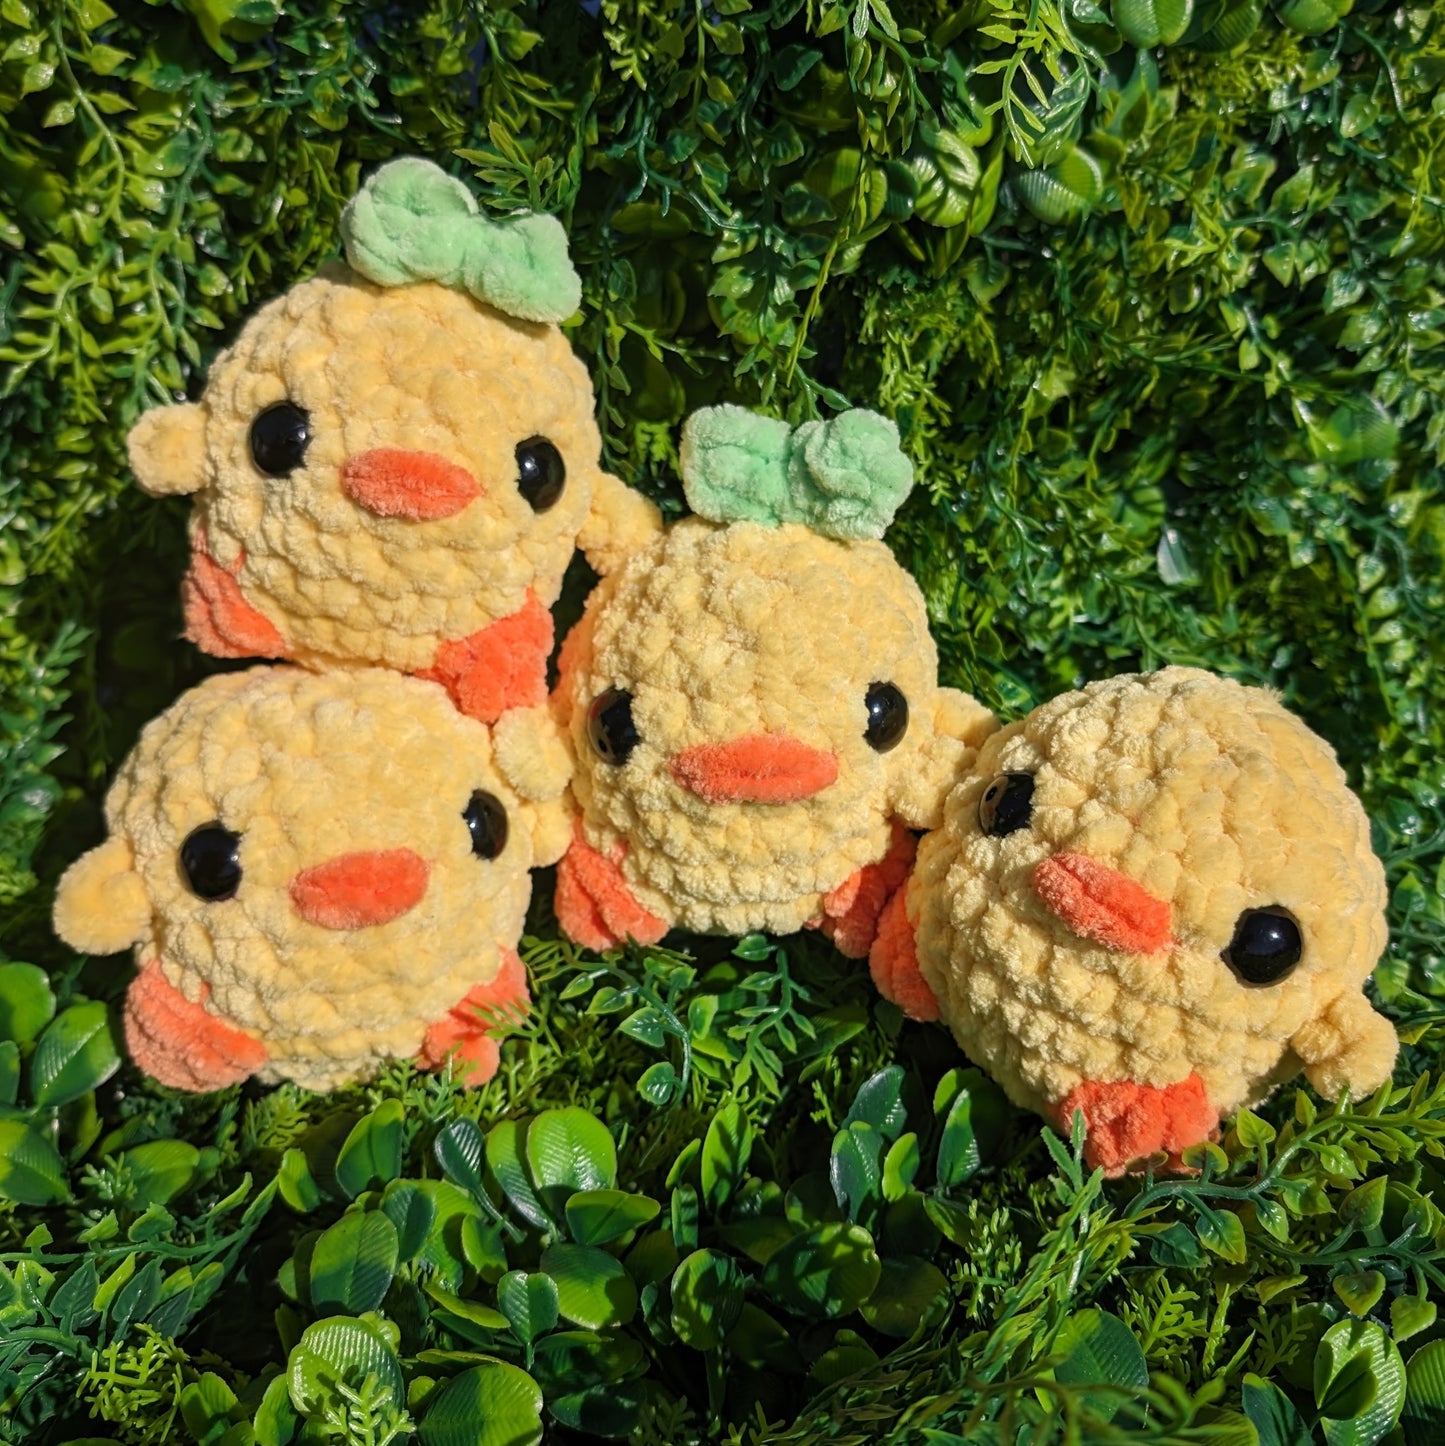 Chubby Chick Crochet Plushie [Archived]